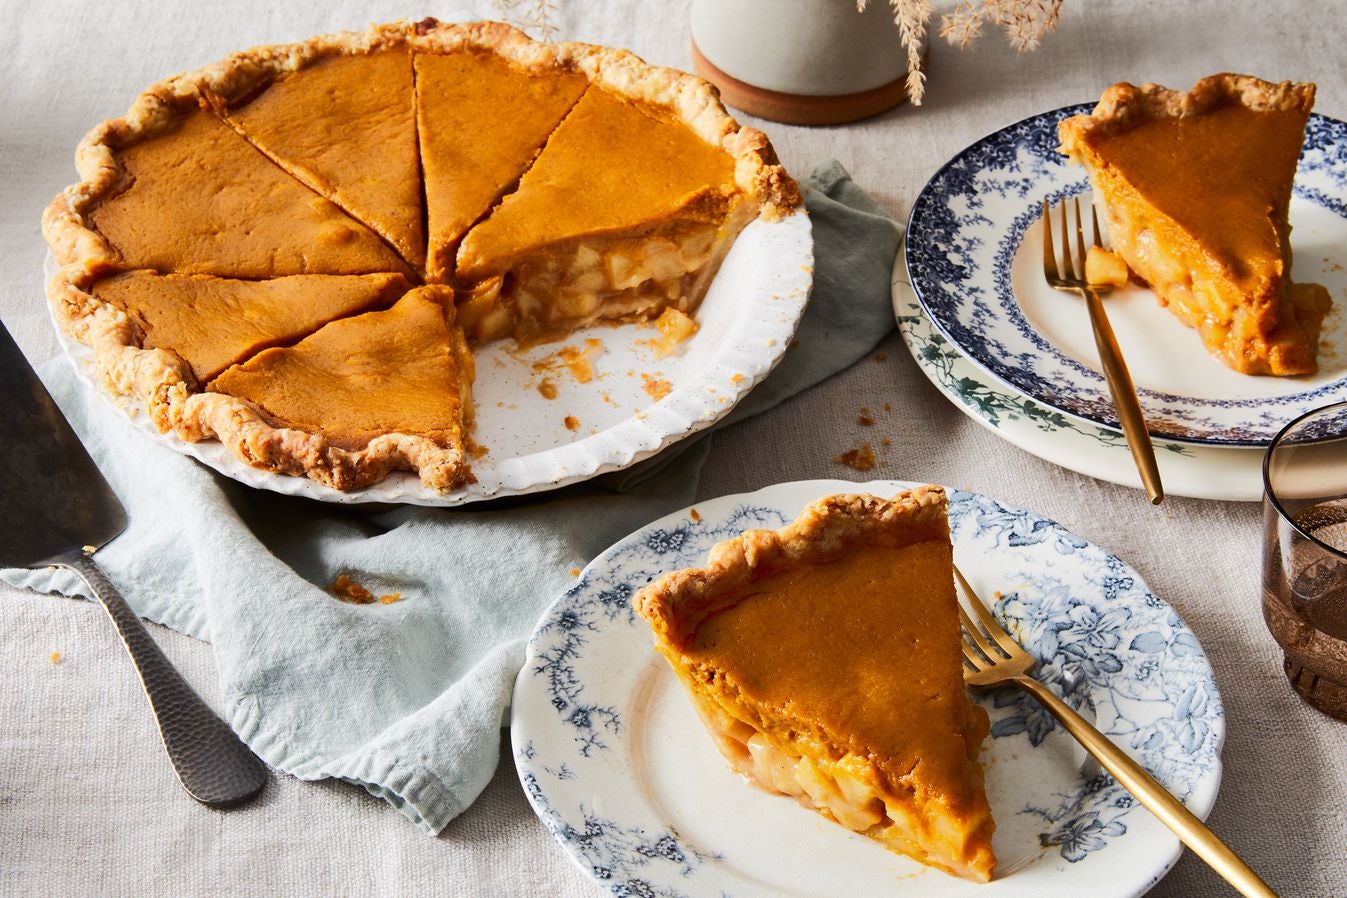 Apple cider pumpkin pie in a ceramic dish with two pie slices on plates beside it, on a tablecloth